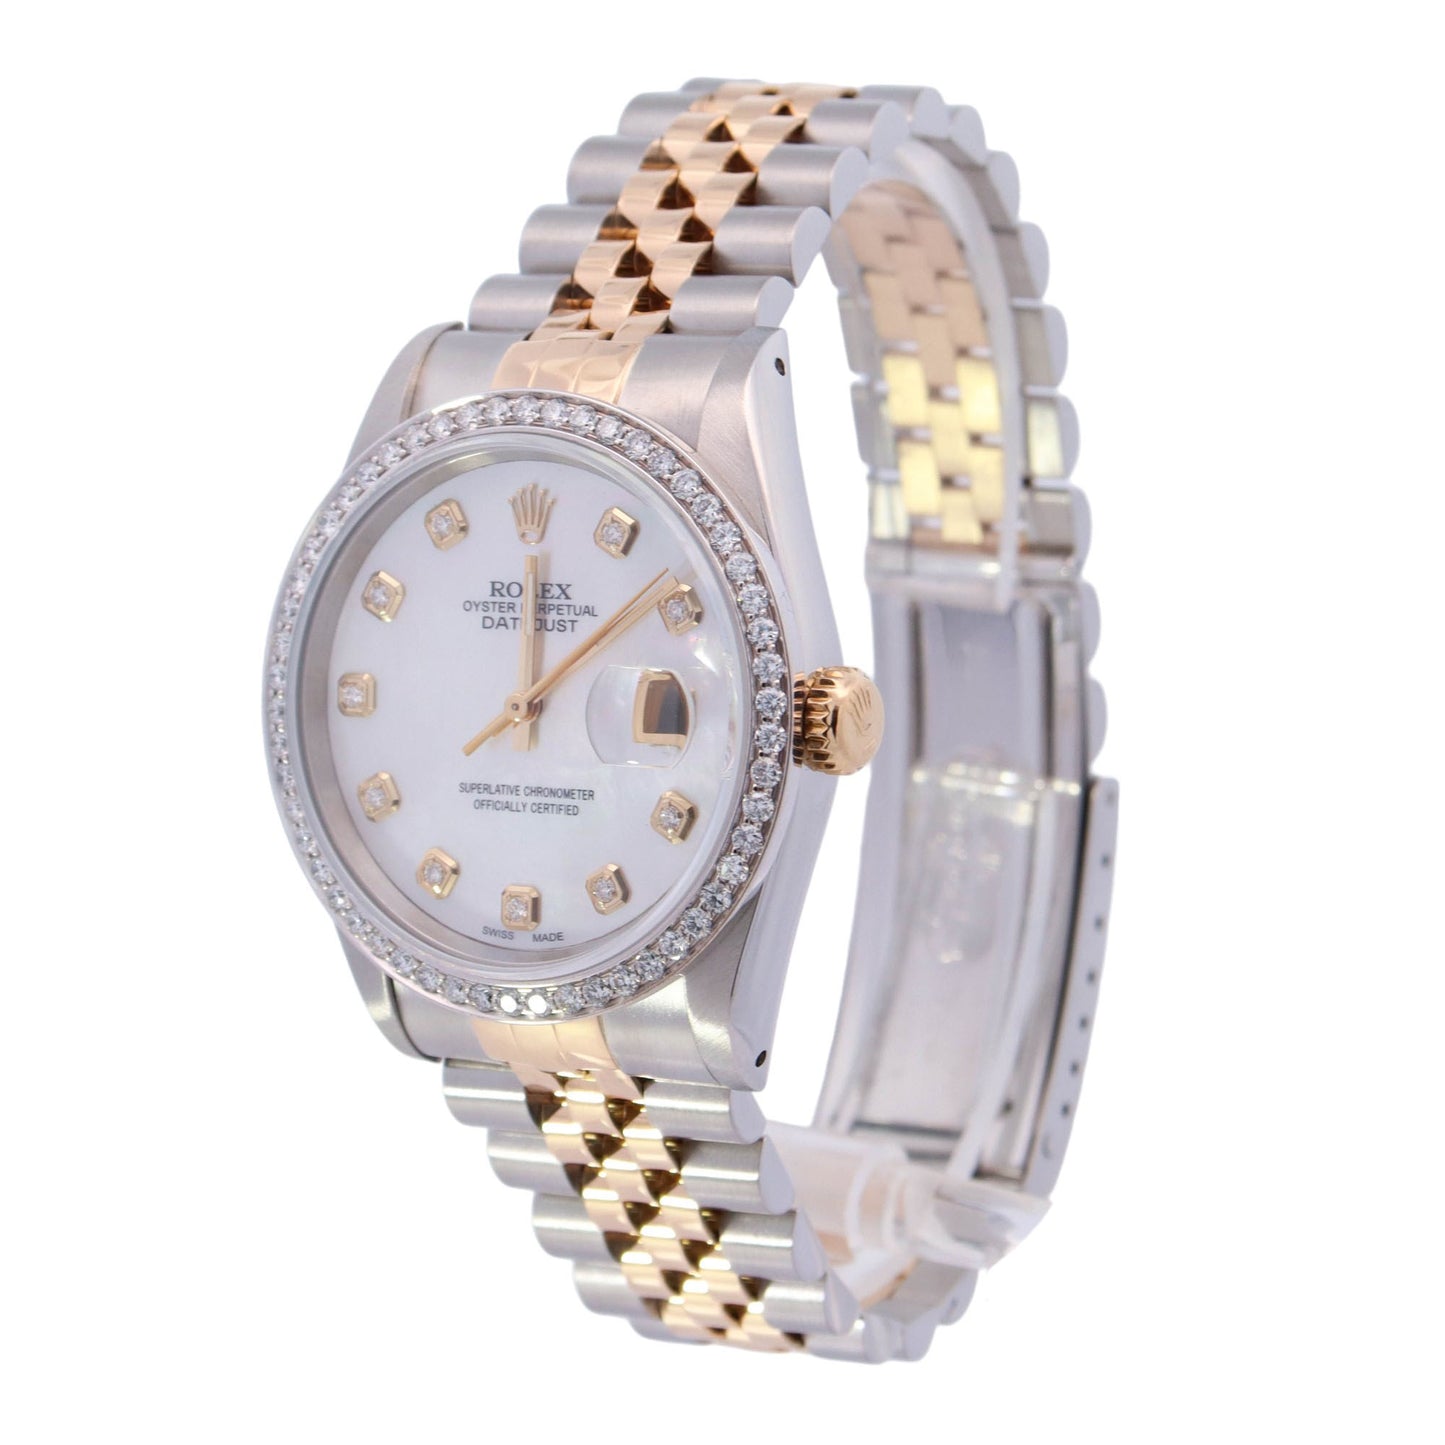 Rolex Datejust Two Tone Yellow Gold &  Stainless Steel 36mm Custom White MOP Diamond Dial Watch Reference# 16233 - Happy Jewelers Fine Jewelry Lifetime Warranty